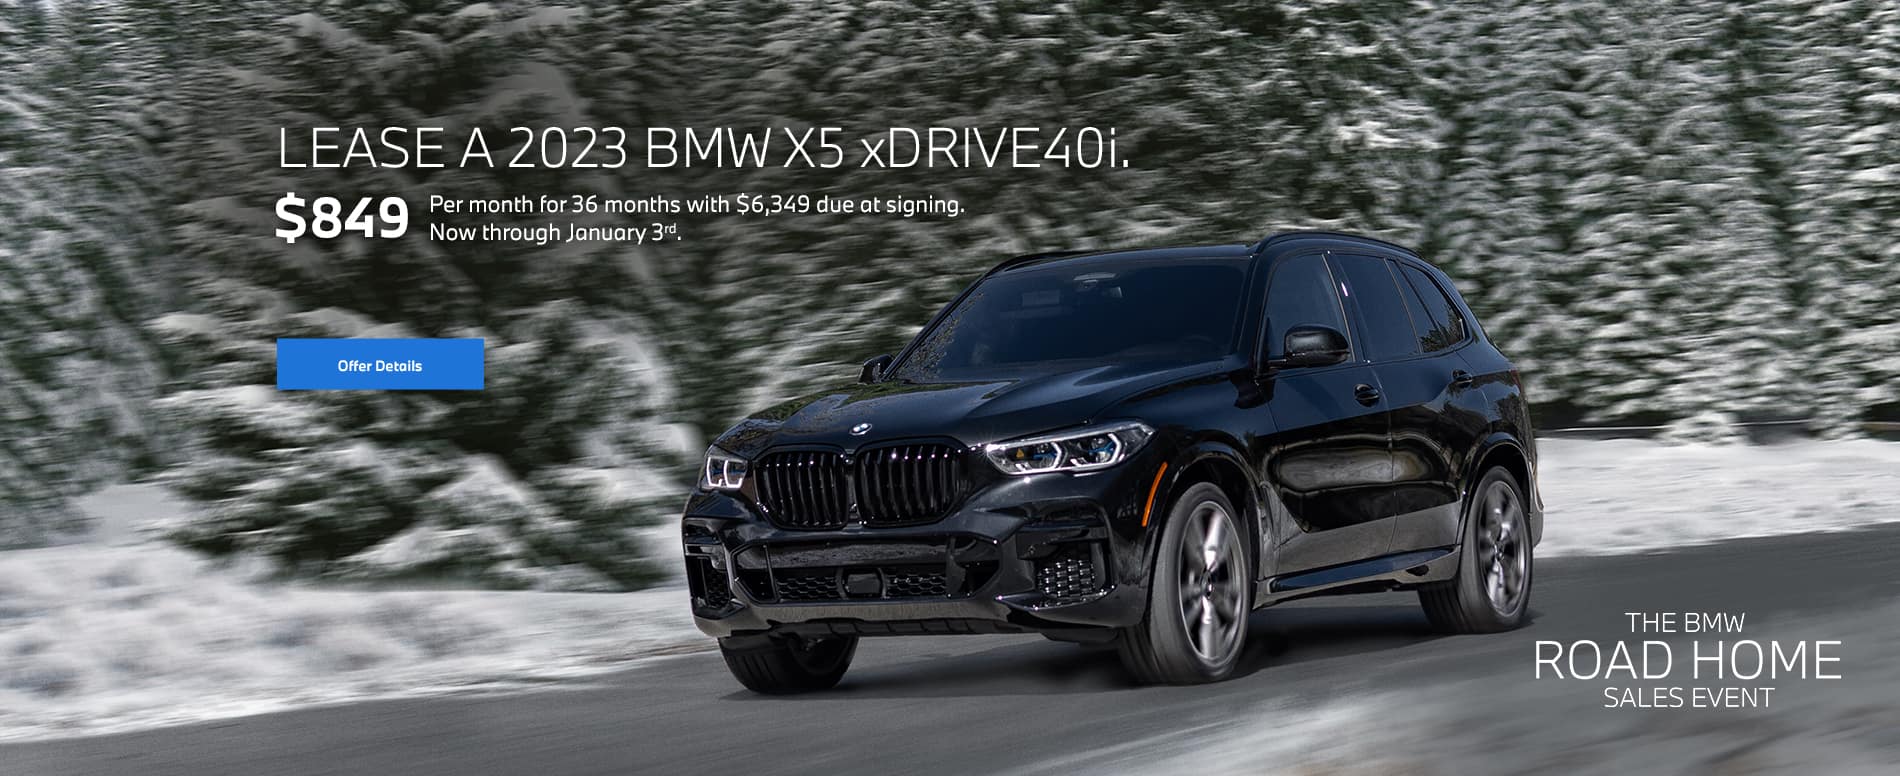 2023 X5 lease starting at $849 per month for 36 months